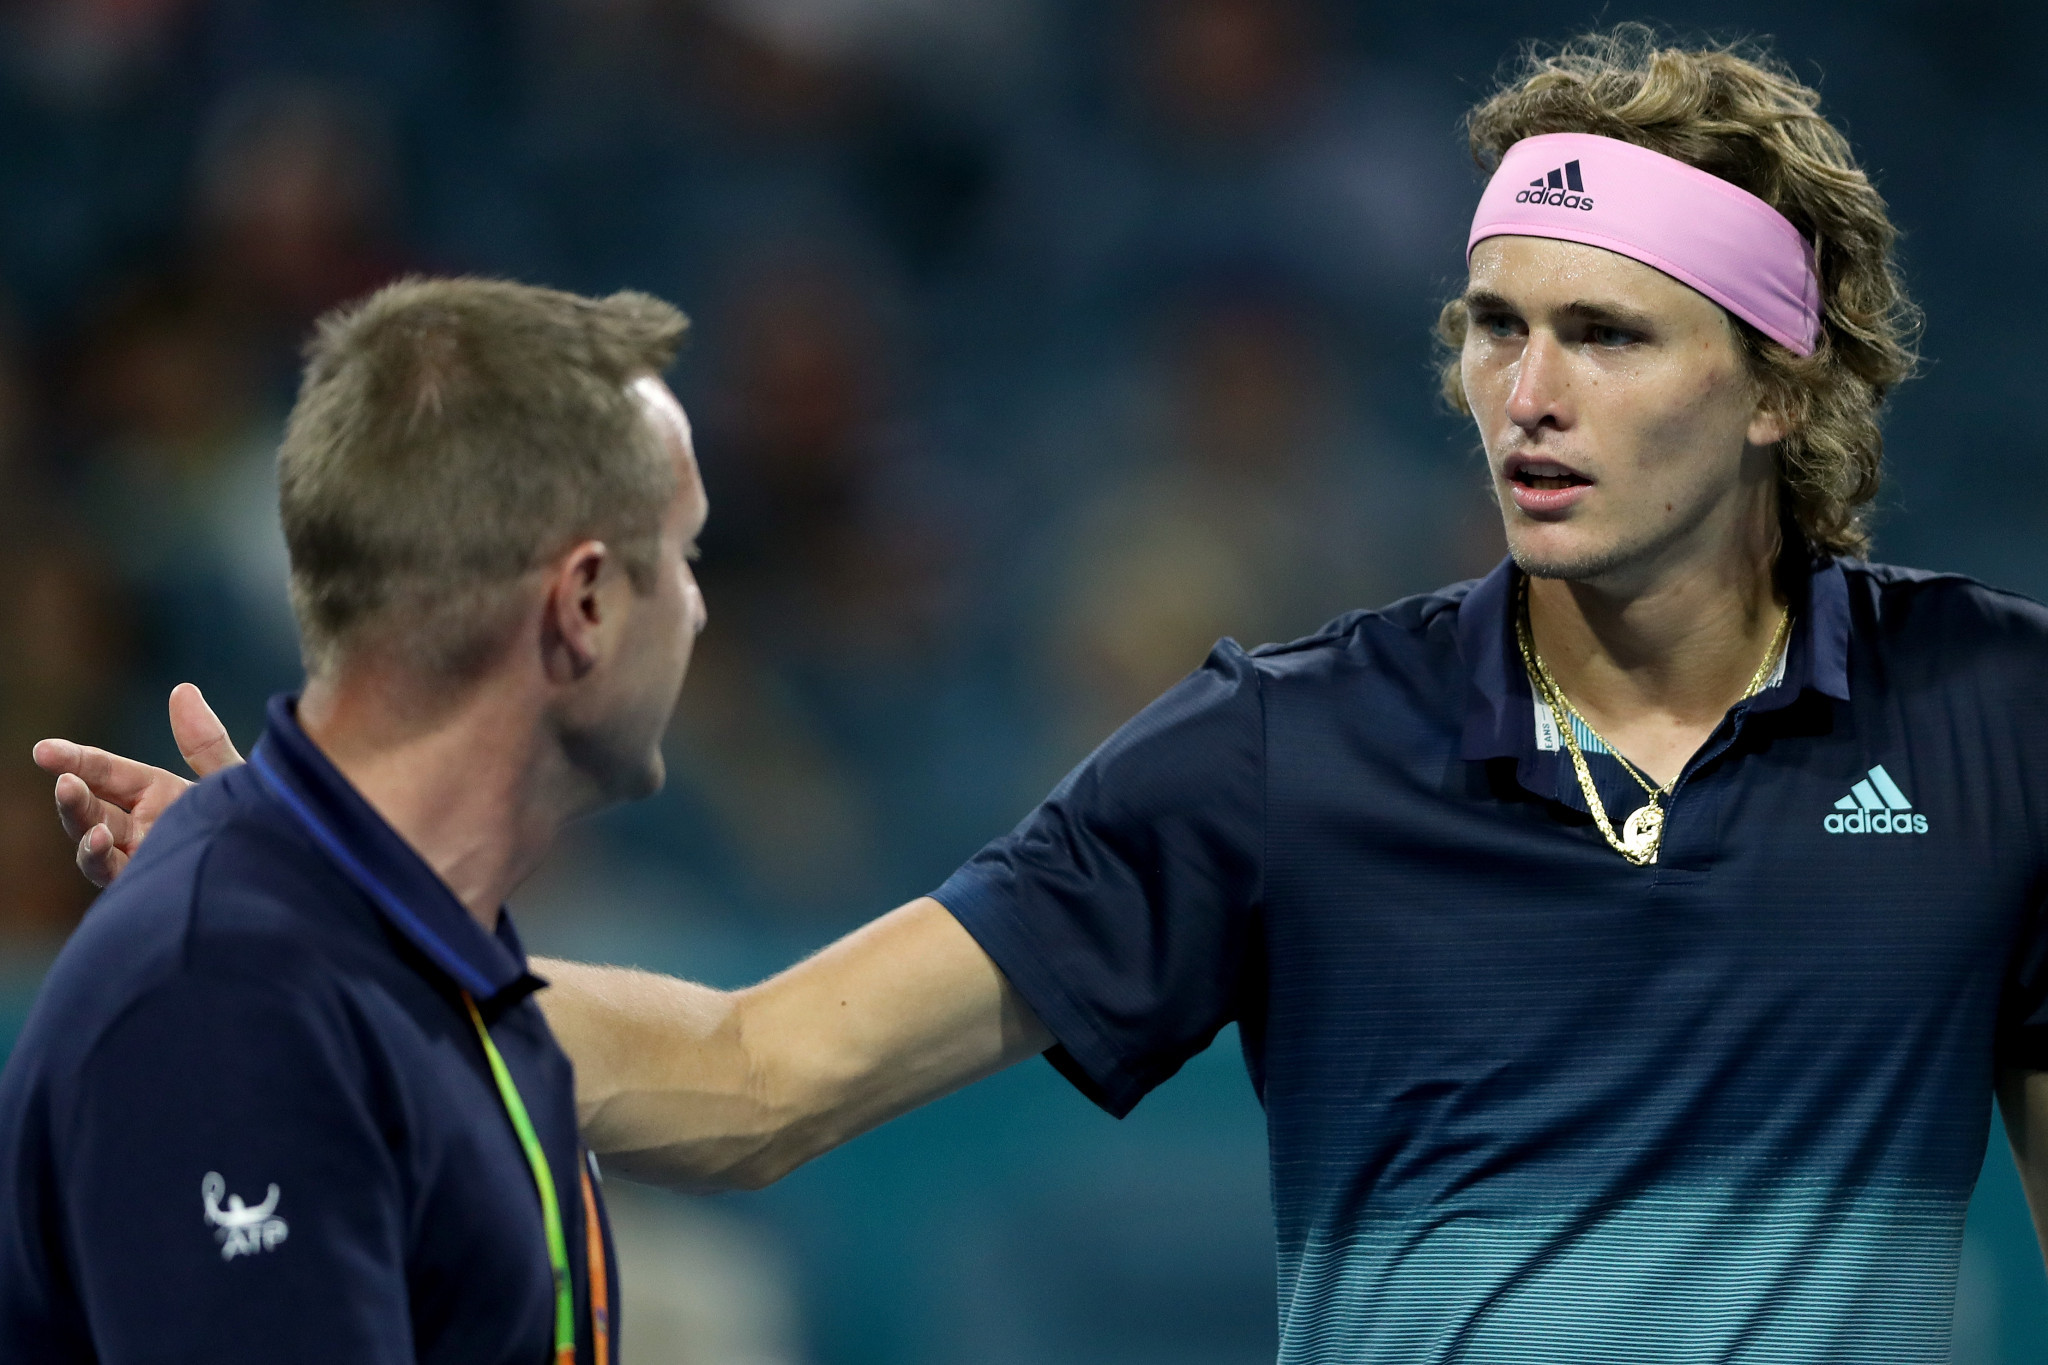 Alex Zverev pictured in conversation with Miro Bratoev, who finalised the suspension against the German following the incident in Mexico ©Getty Images